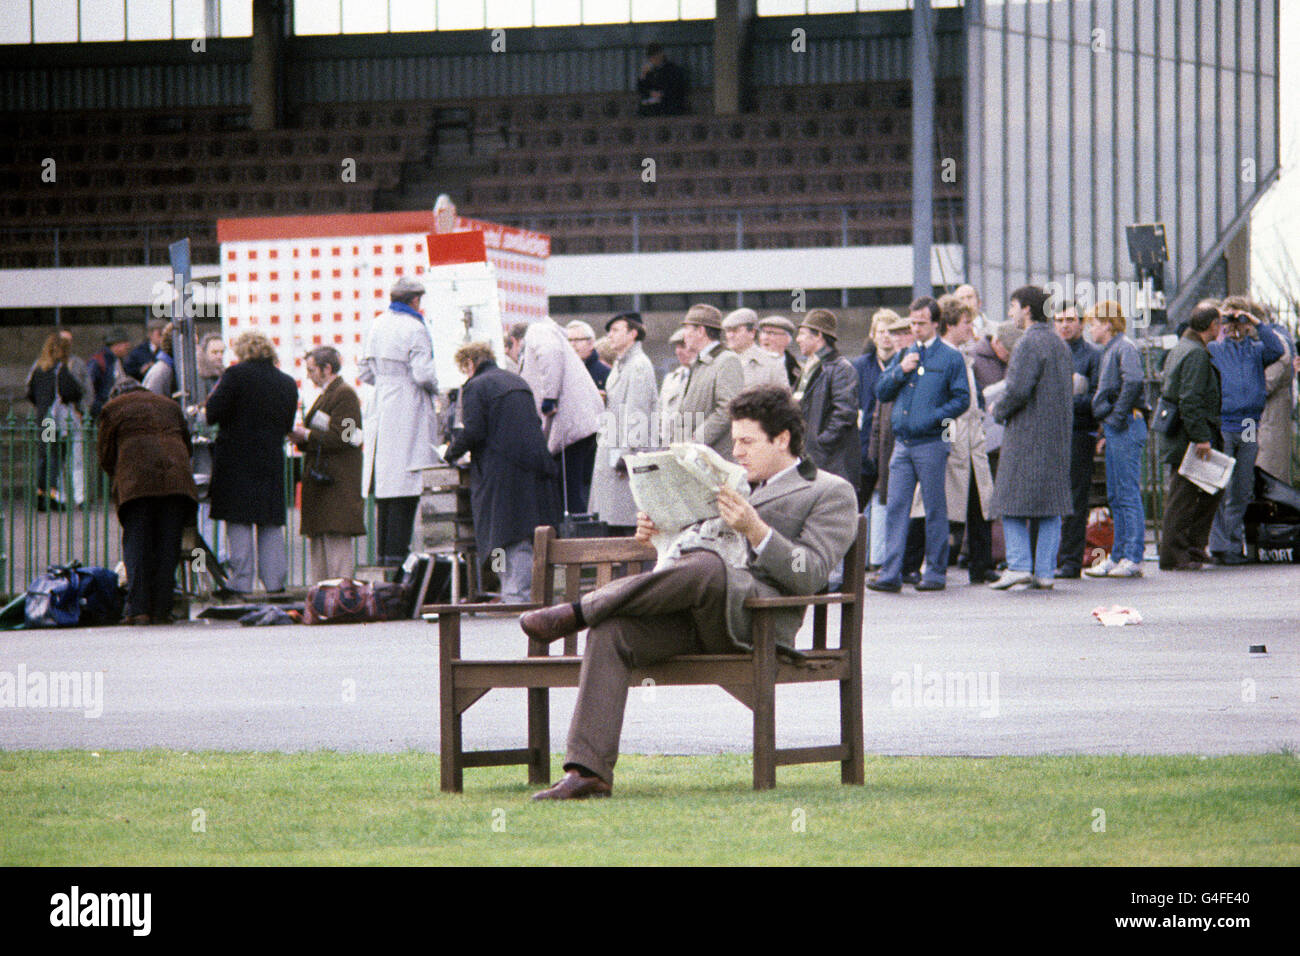 Horse Racing - January Races - Kempton Park Racecourse. A racegoer users his newspaper to look up the latest odds as punters queue to place bets in the background Stock Photo